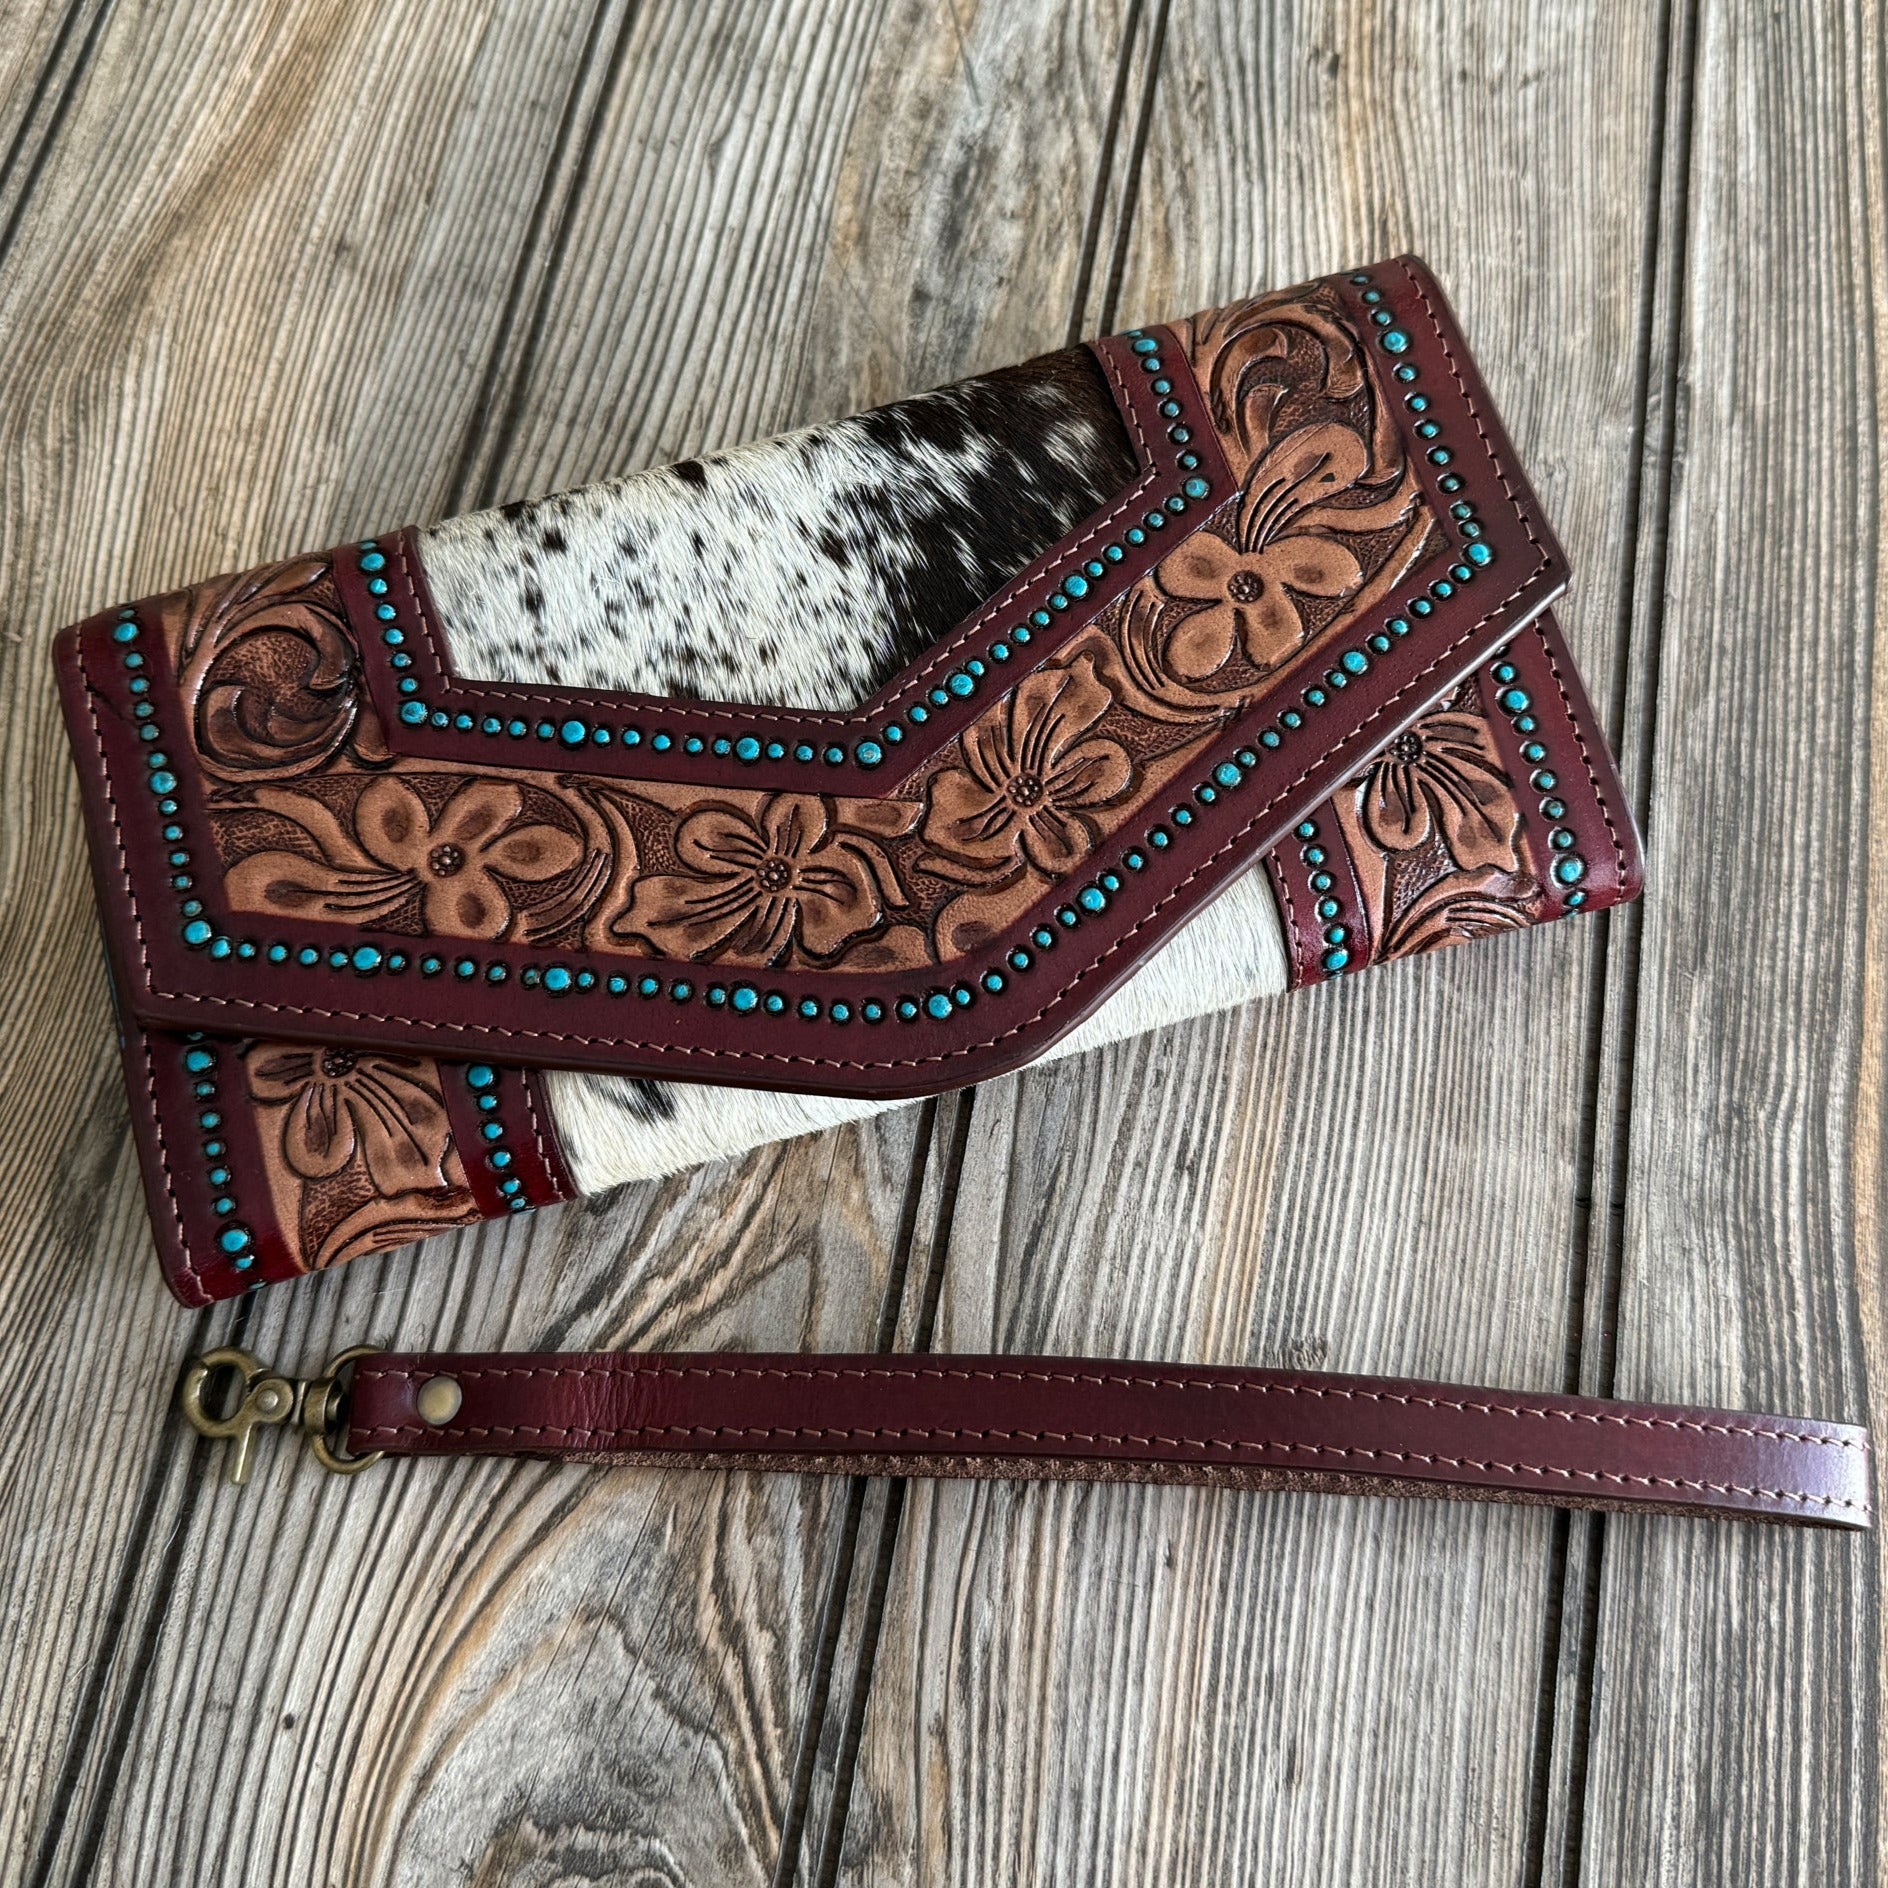 Hand Tooled Leather Clutch Wallet With Turquoise Accent